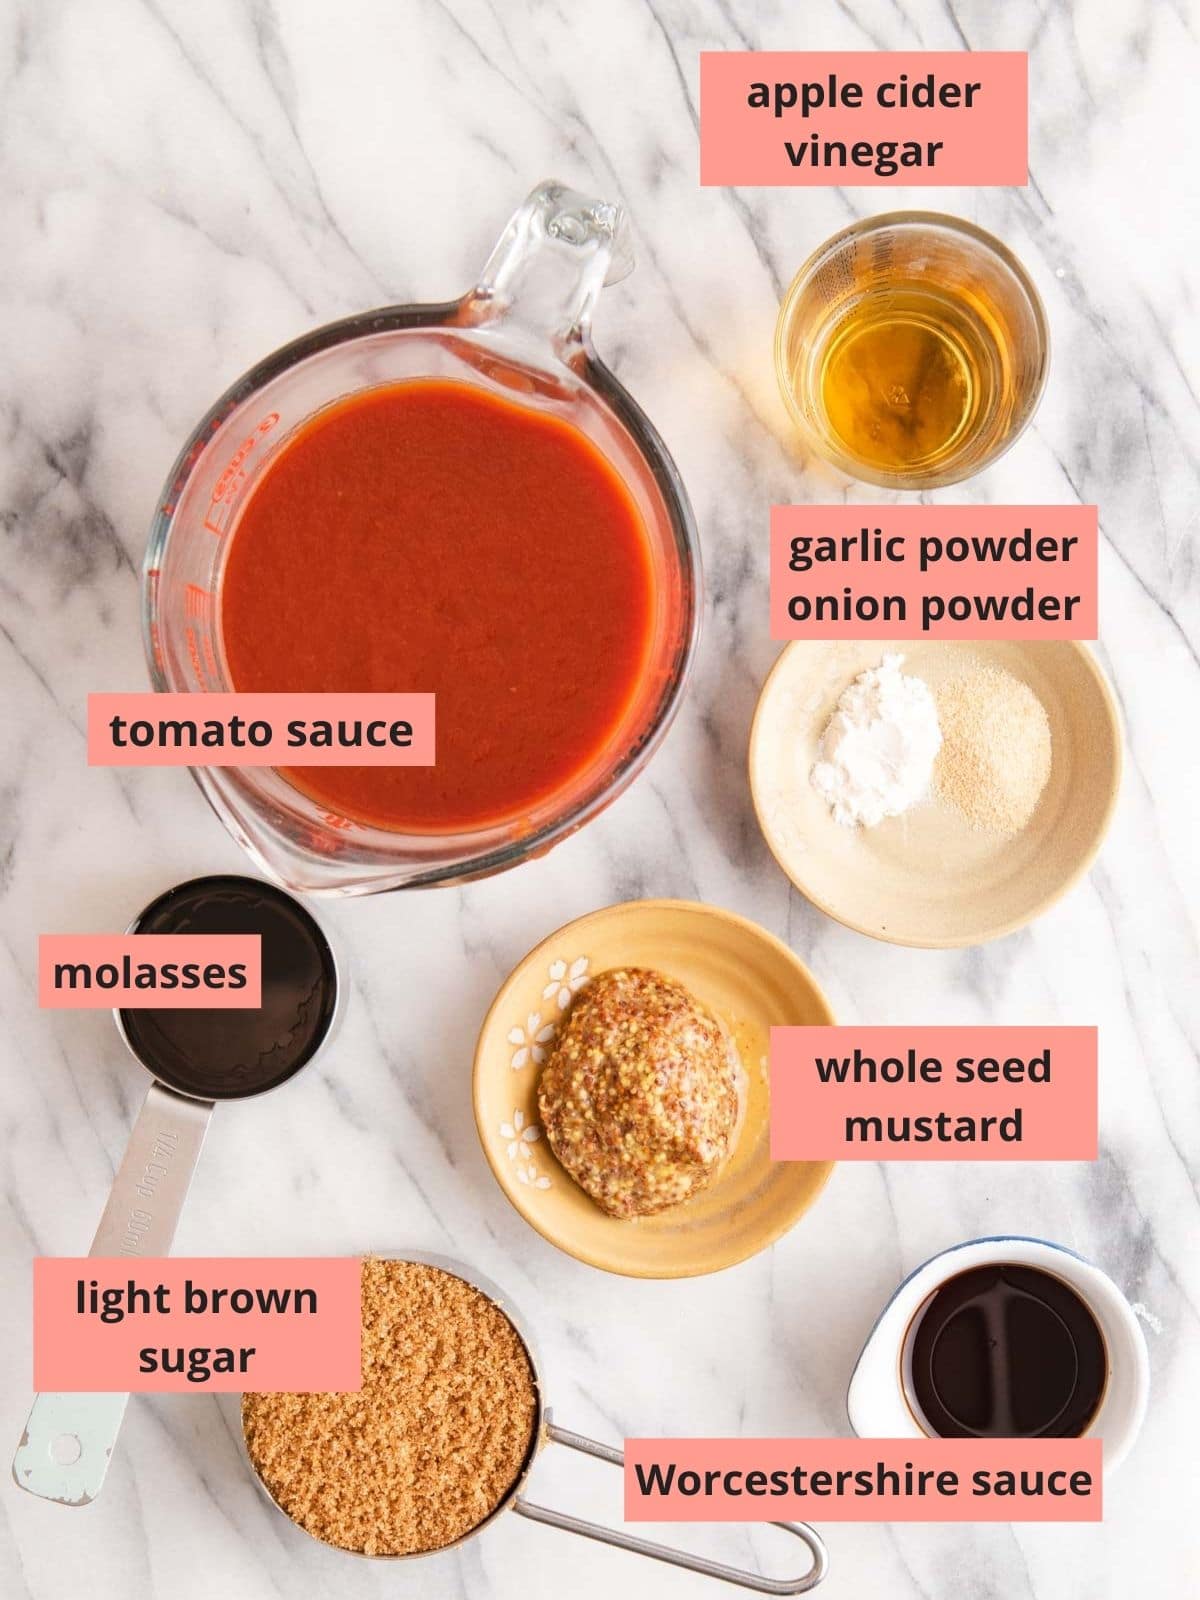 Labeled ingredients used to make BBQ sauce.